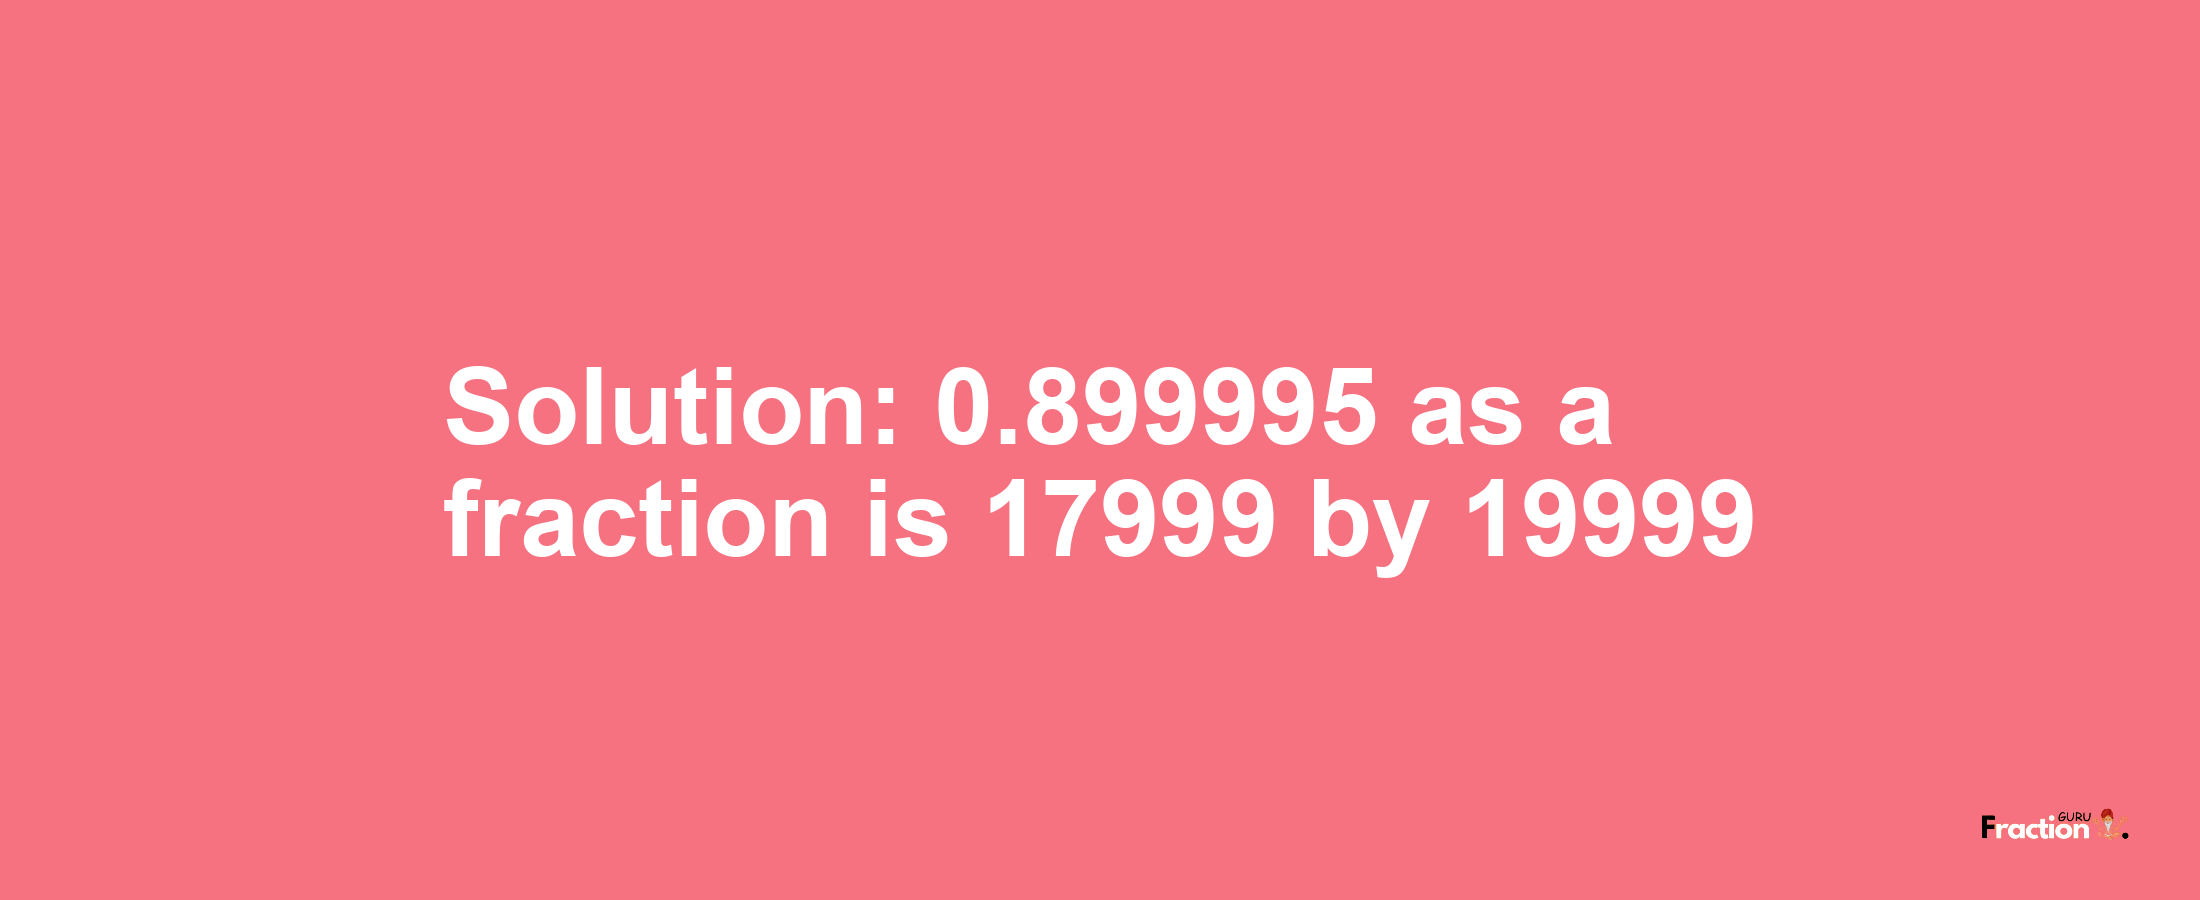 Solution:0.899995 as a fraction is 17999/19999